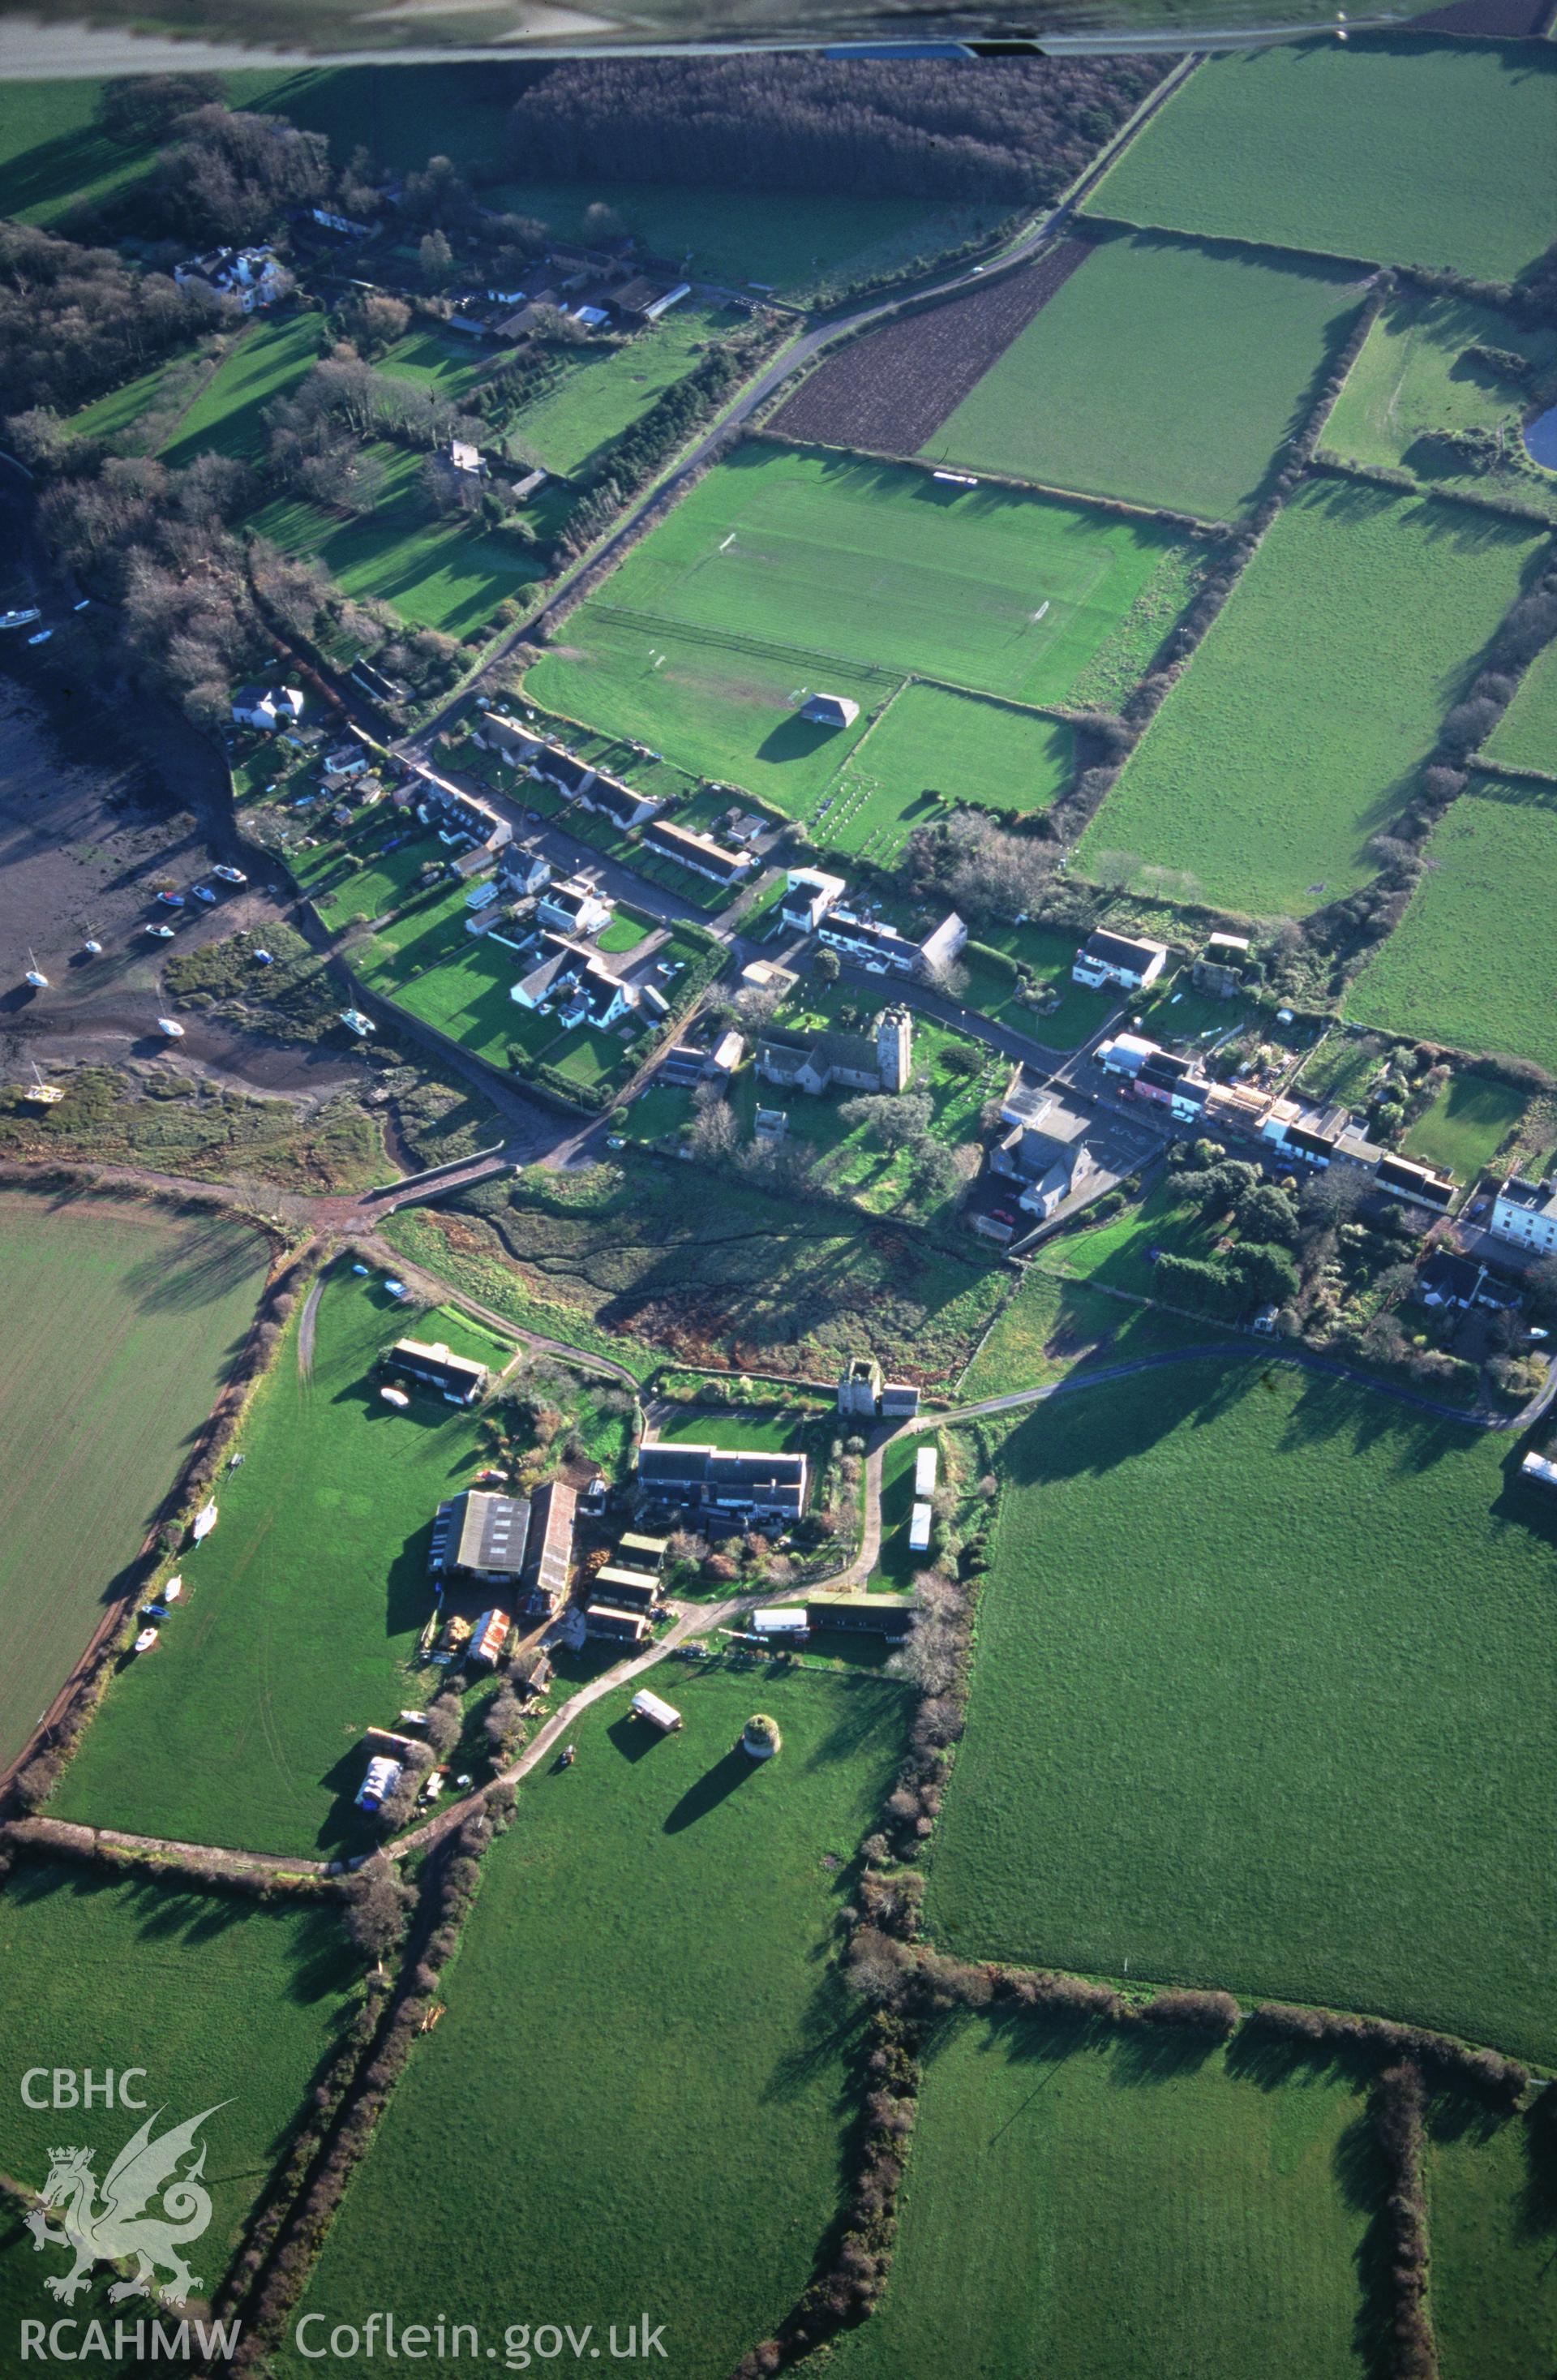 Slide of RCAHMW colour oblique aerial photograph of Angle Village, taken by T.G. Driver, 3/12/1997.